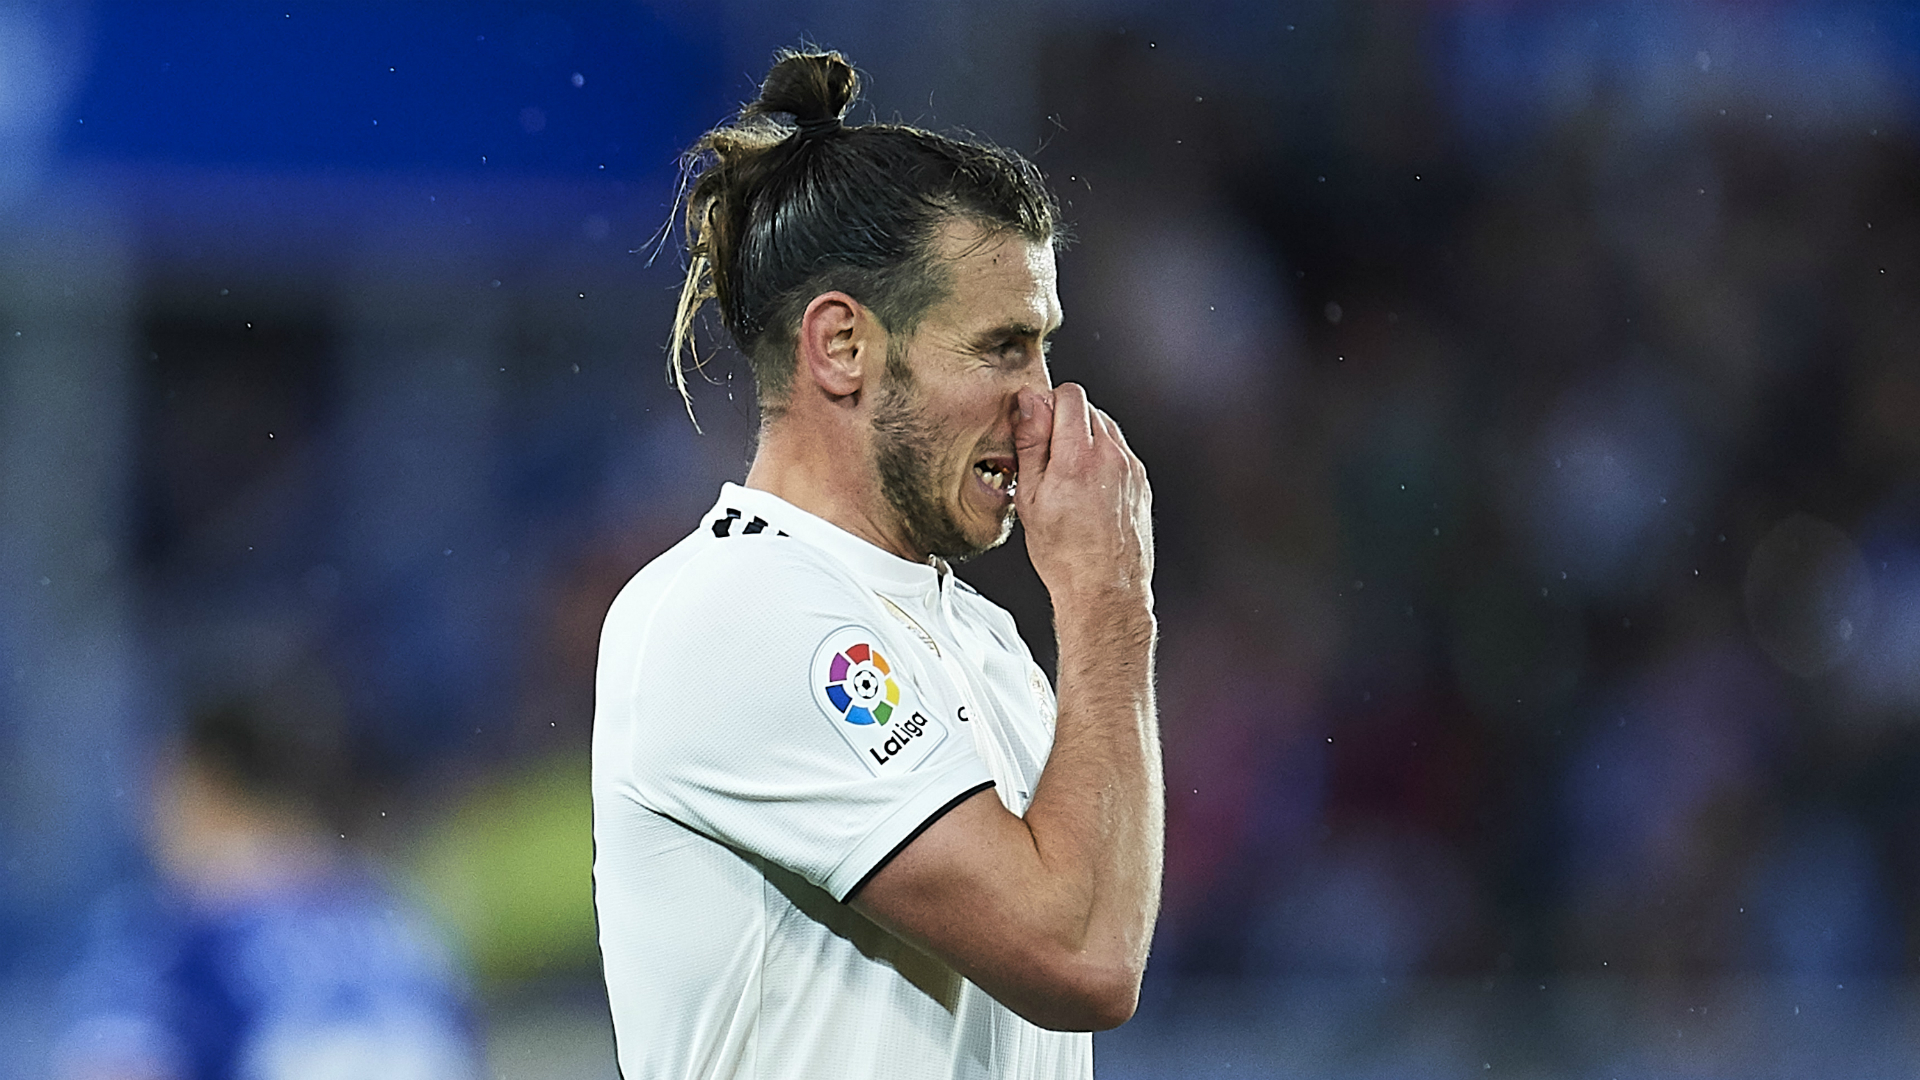 Lopetegui on the brink as Madrid's abysmal run continues